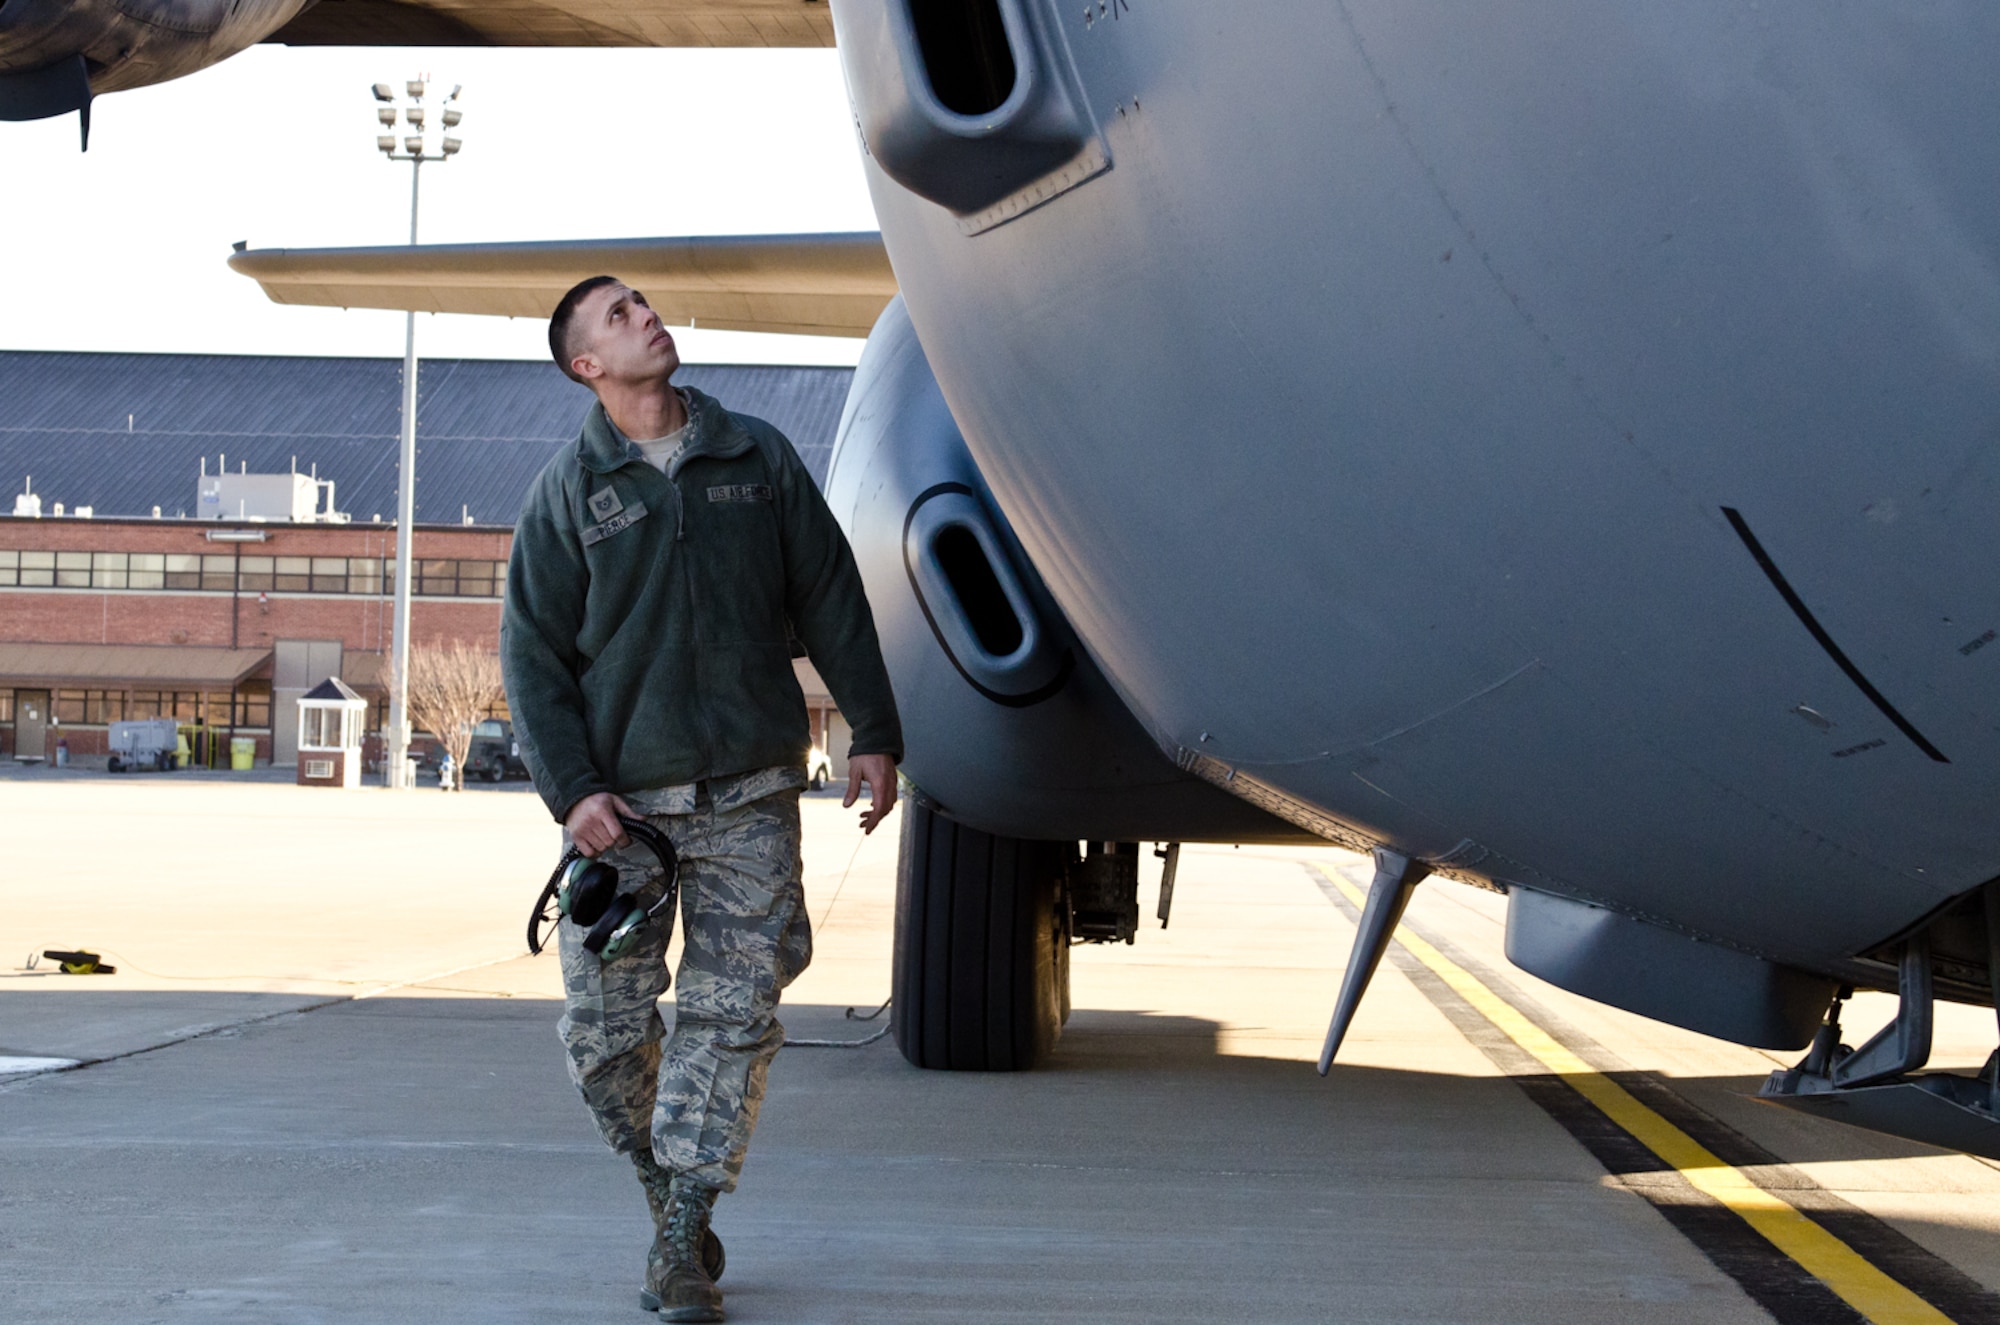 Tech. Sgt. Fred Pierce, 139th Aircraft Maintenance Squadron crew chief, walks along the fuselage of a C-130 Hercules aircraft at Rosecrans Air National Guard Base, St. Joseph, Mo., on Dec. 29, 2011. Pierce was selected as the Outstanding Noncommissioned Officer of the Year for the Missouri Air National Guard. (Missouri Air National Guard photo by Staff Sgt. Michael Crane)